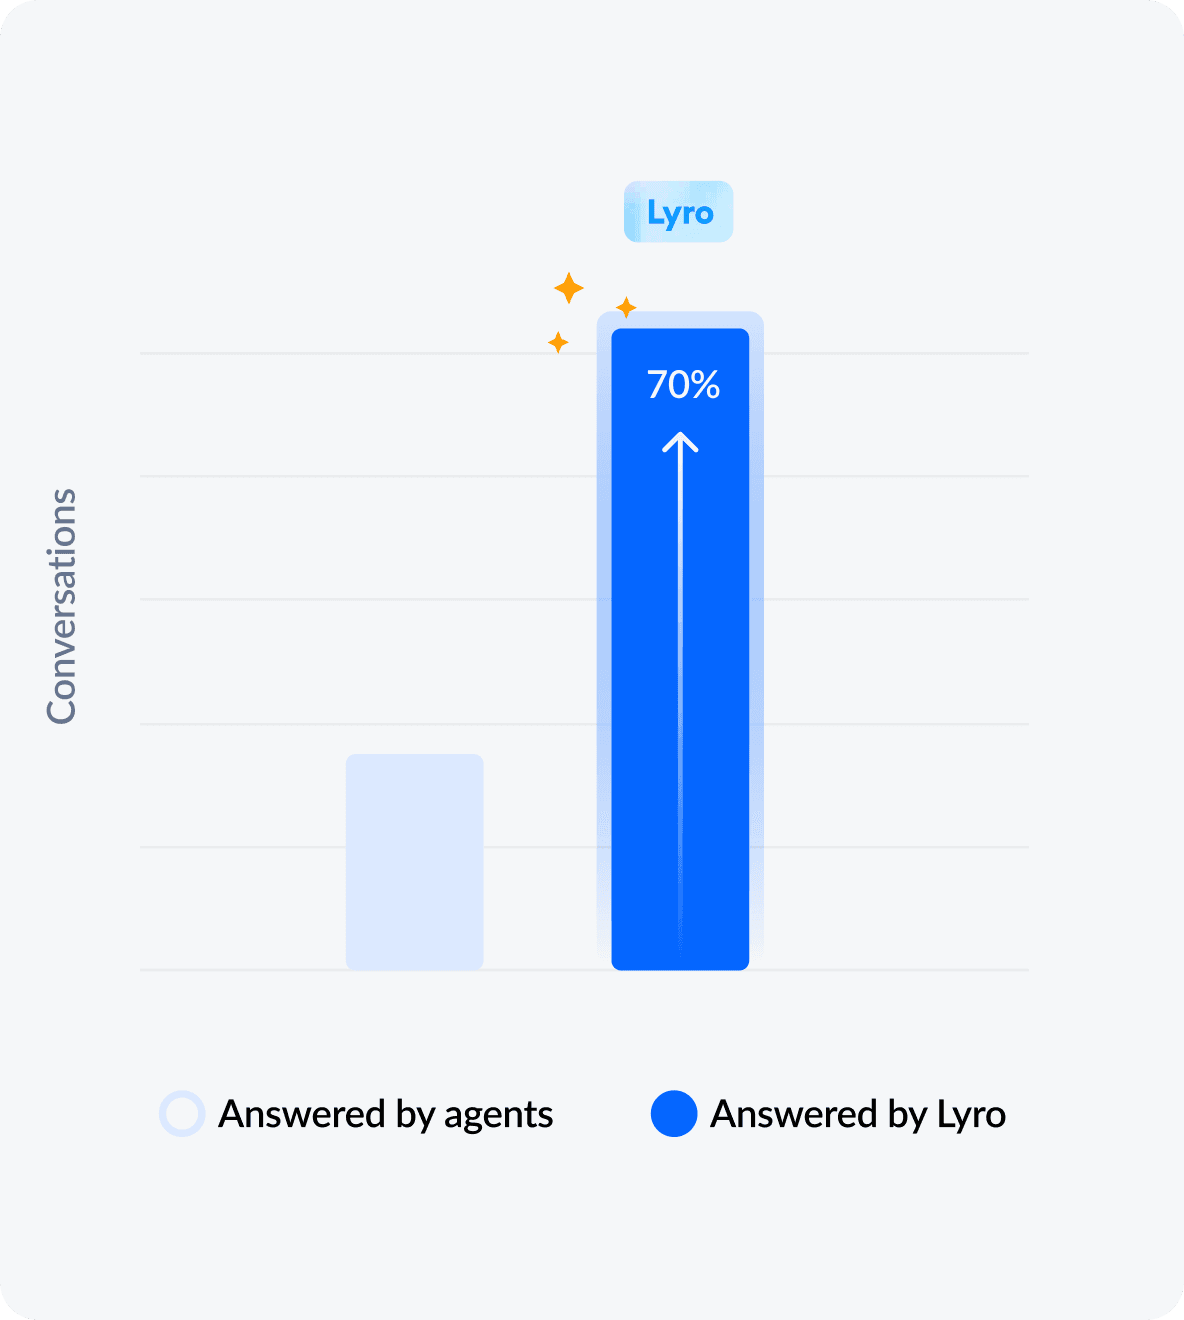 Automatically answer up to 70% of customer questions